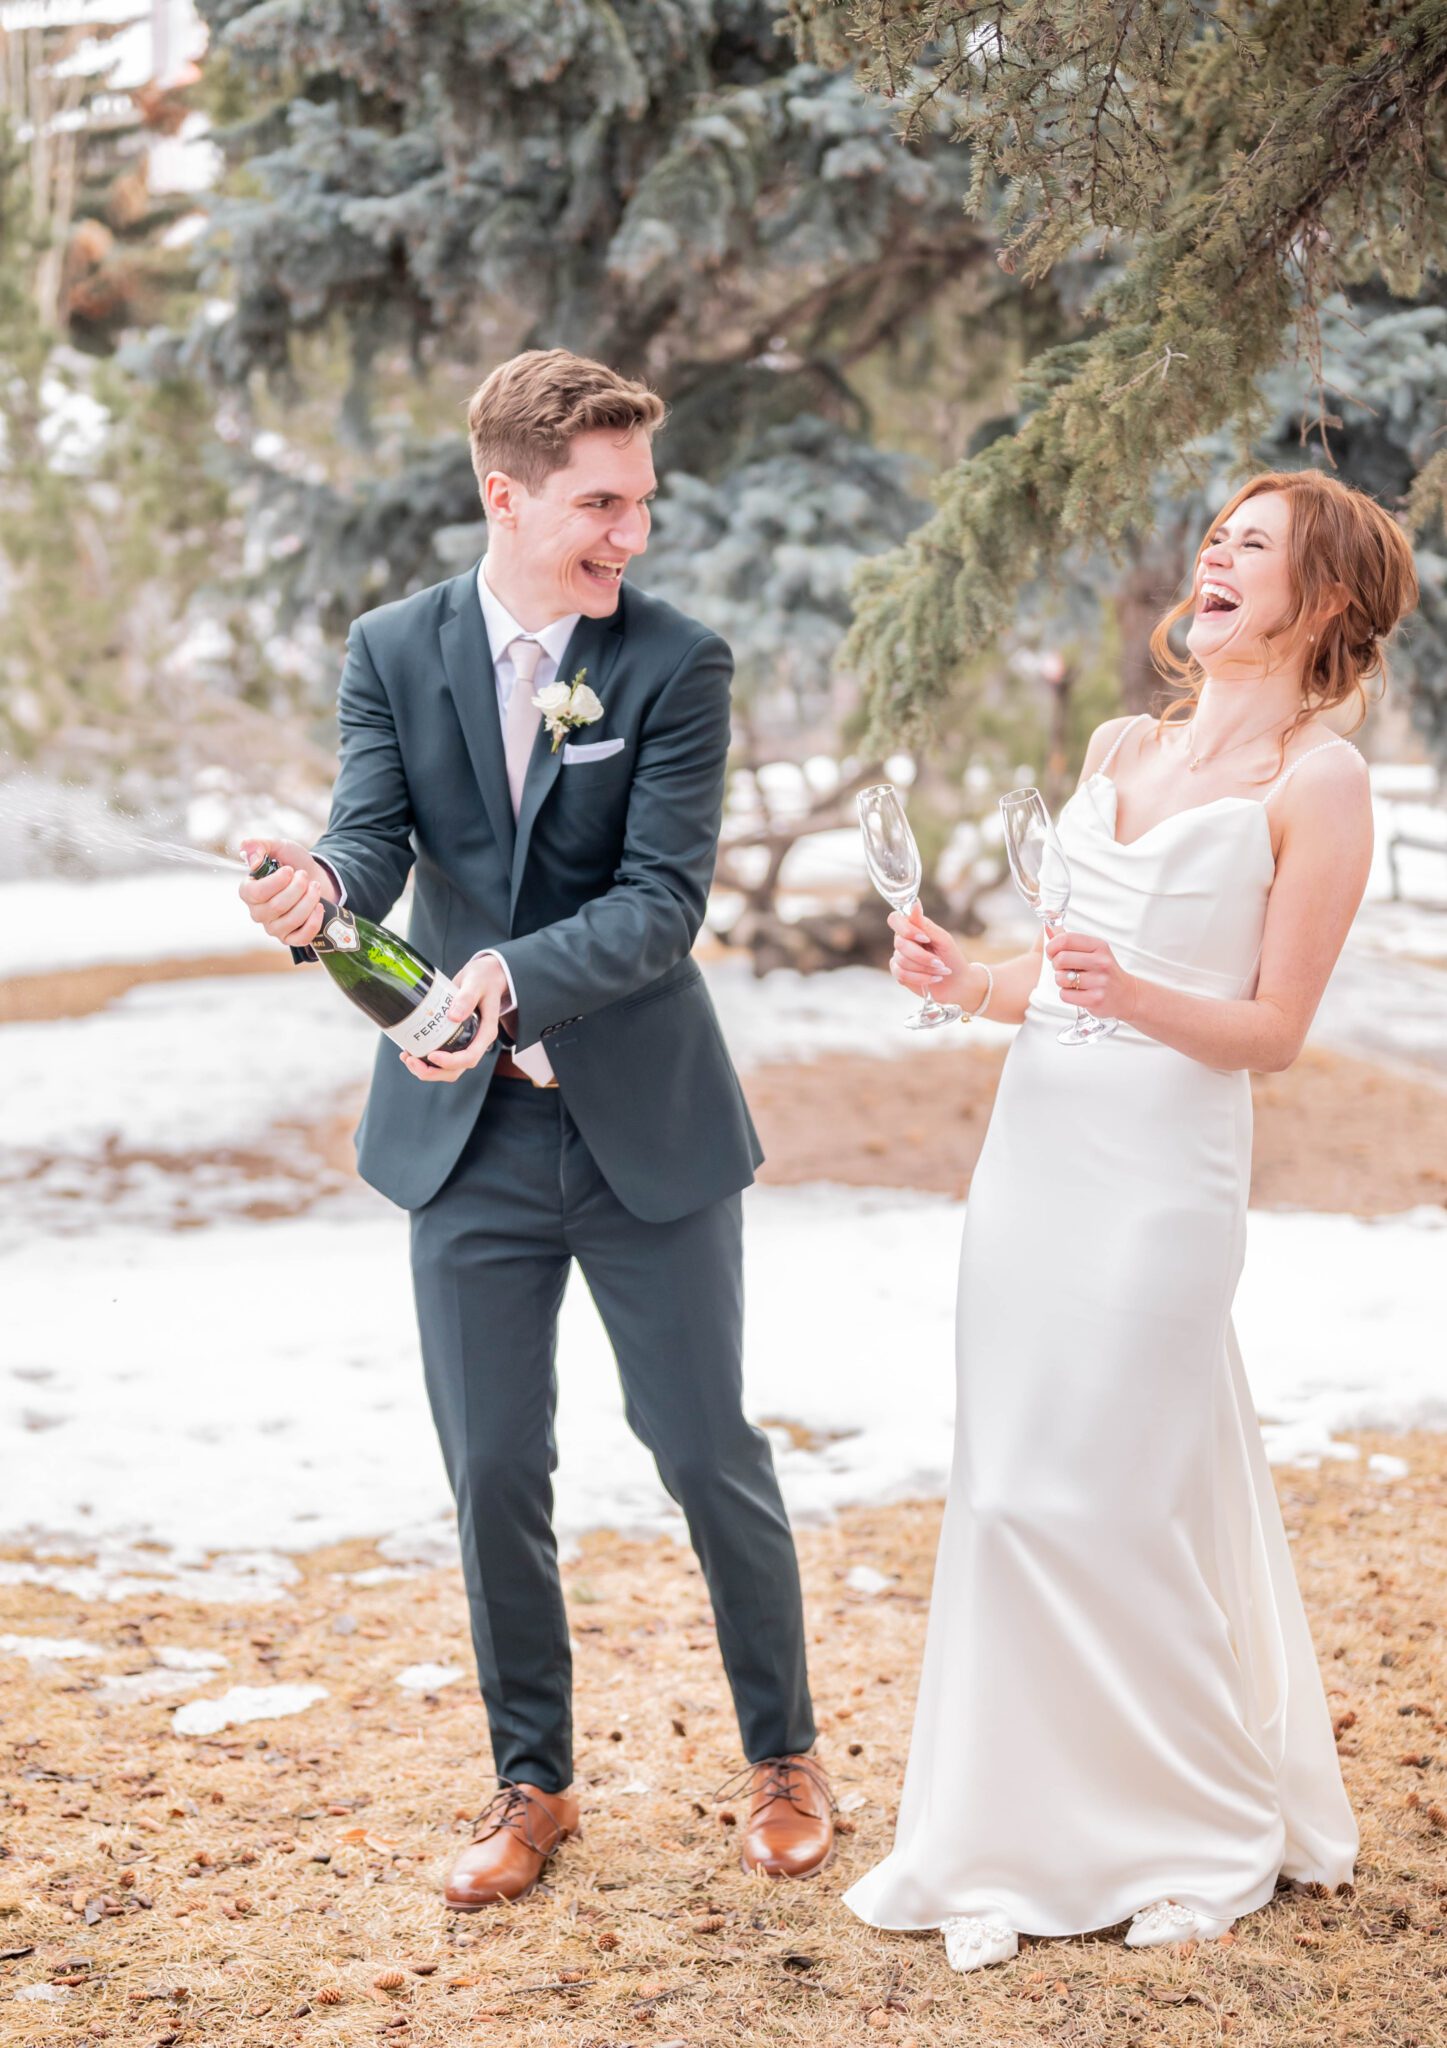 Bride and groom celebrate by popping a bottle of champagne, after their elegant wedding ceremony, classic Calgary wedding inspiration. 